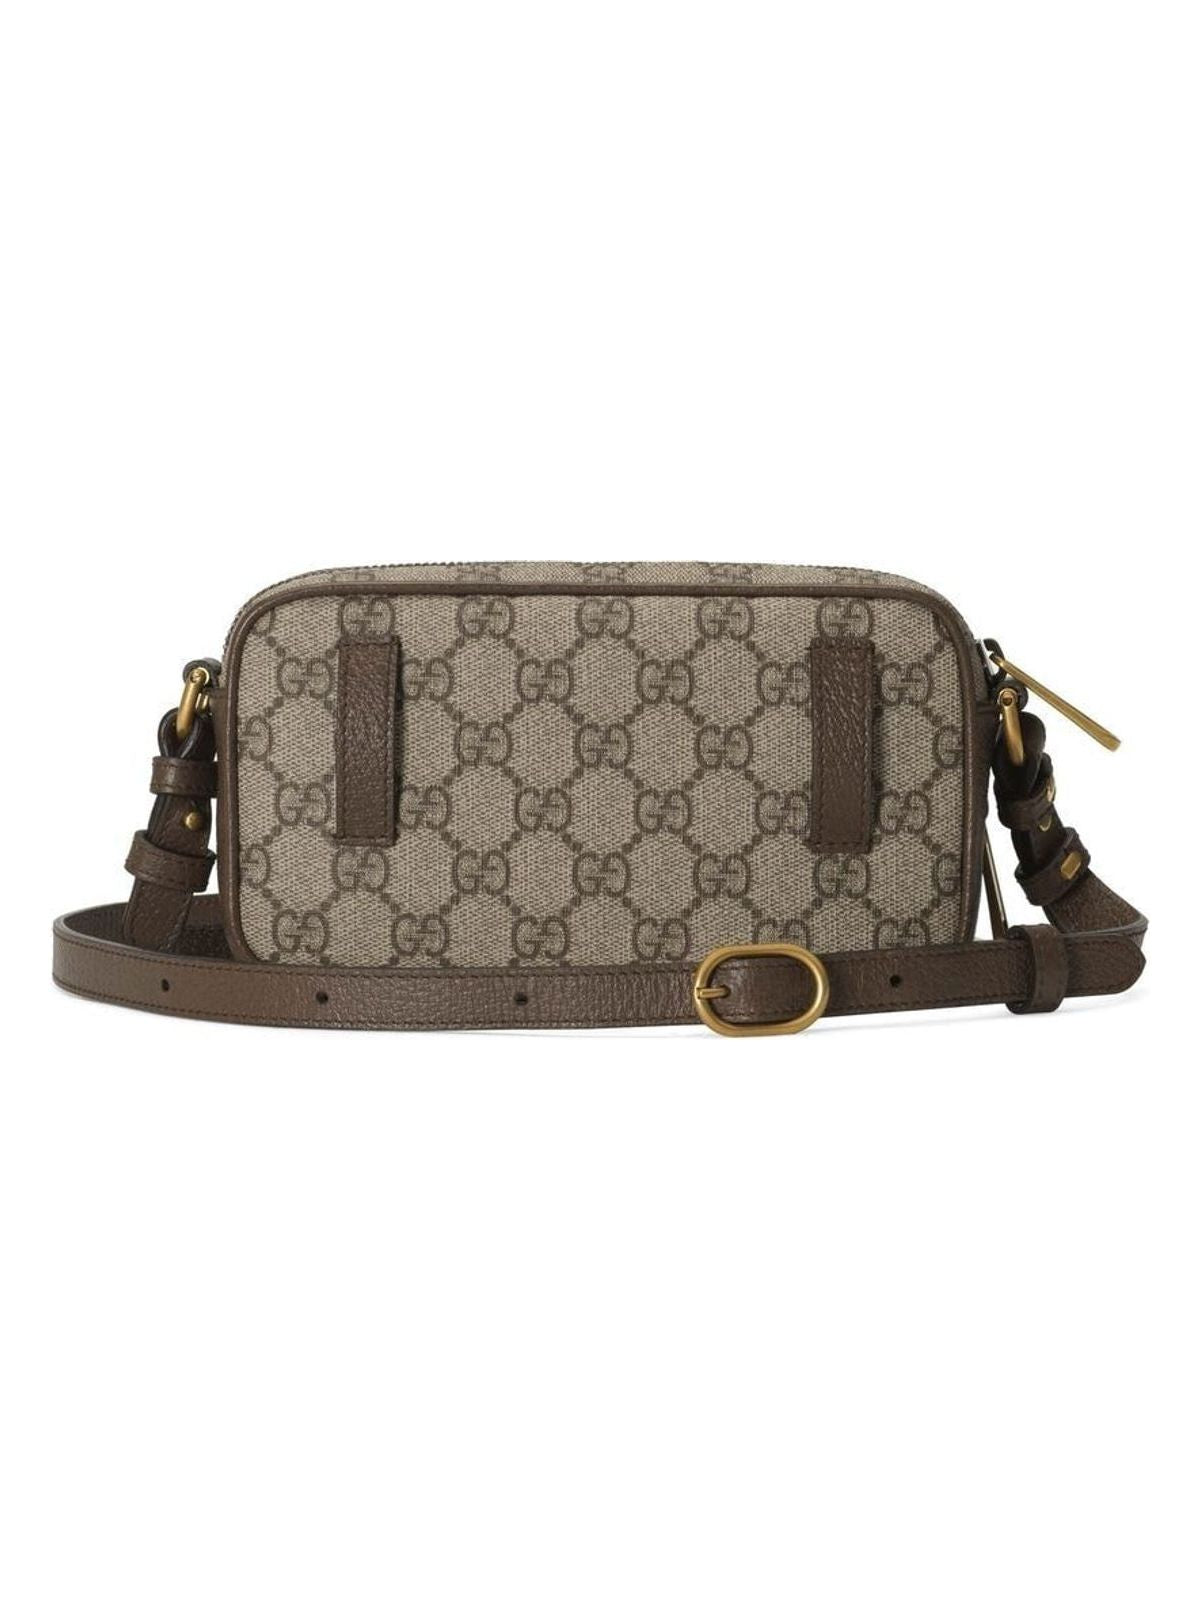 8745 GUCCI OPHIDIA MESSENGER BAG IN GG SUPREME FABRIC